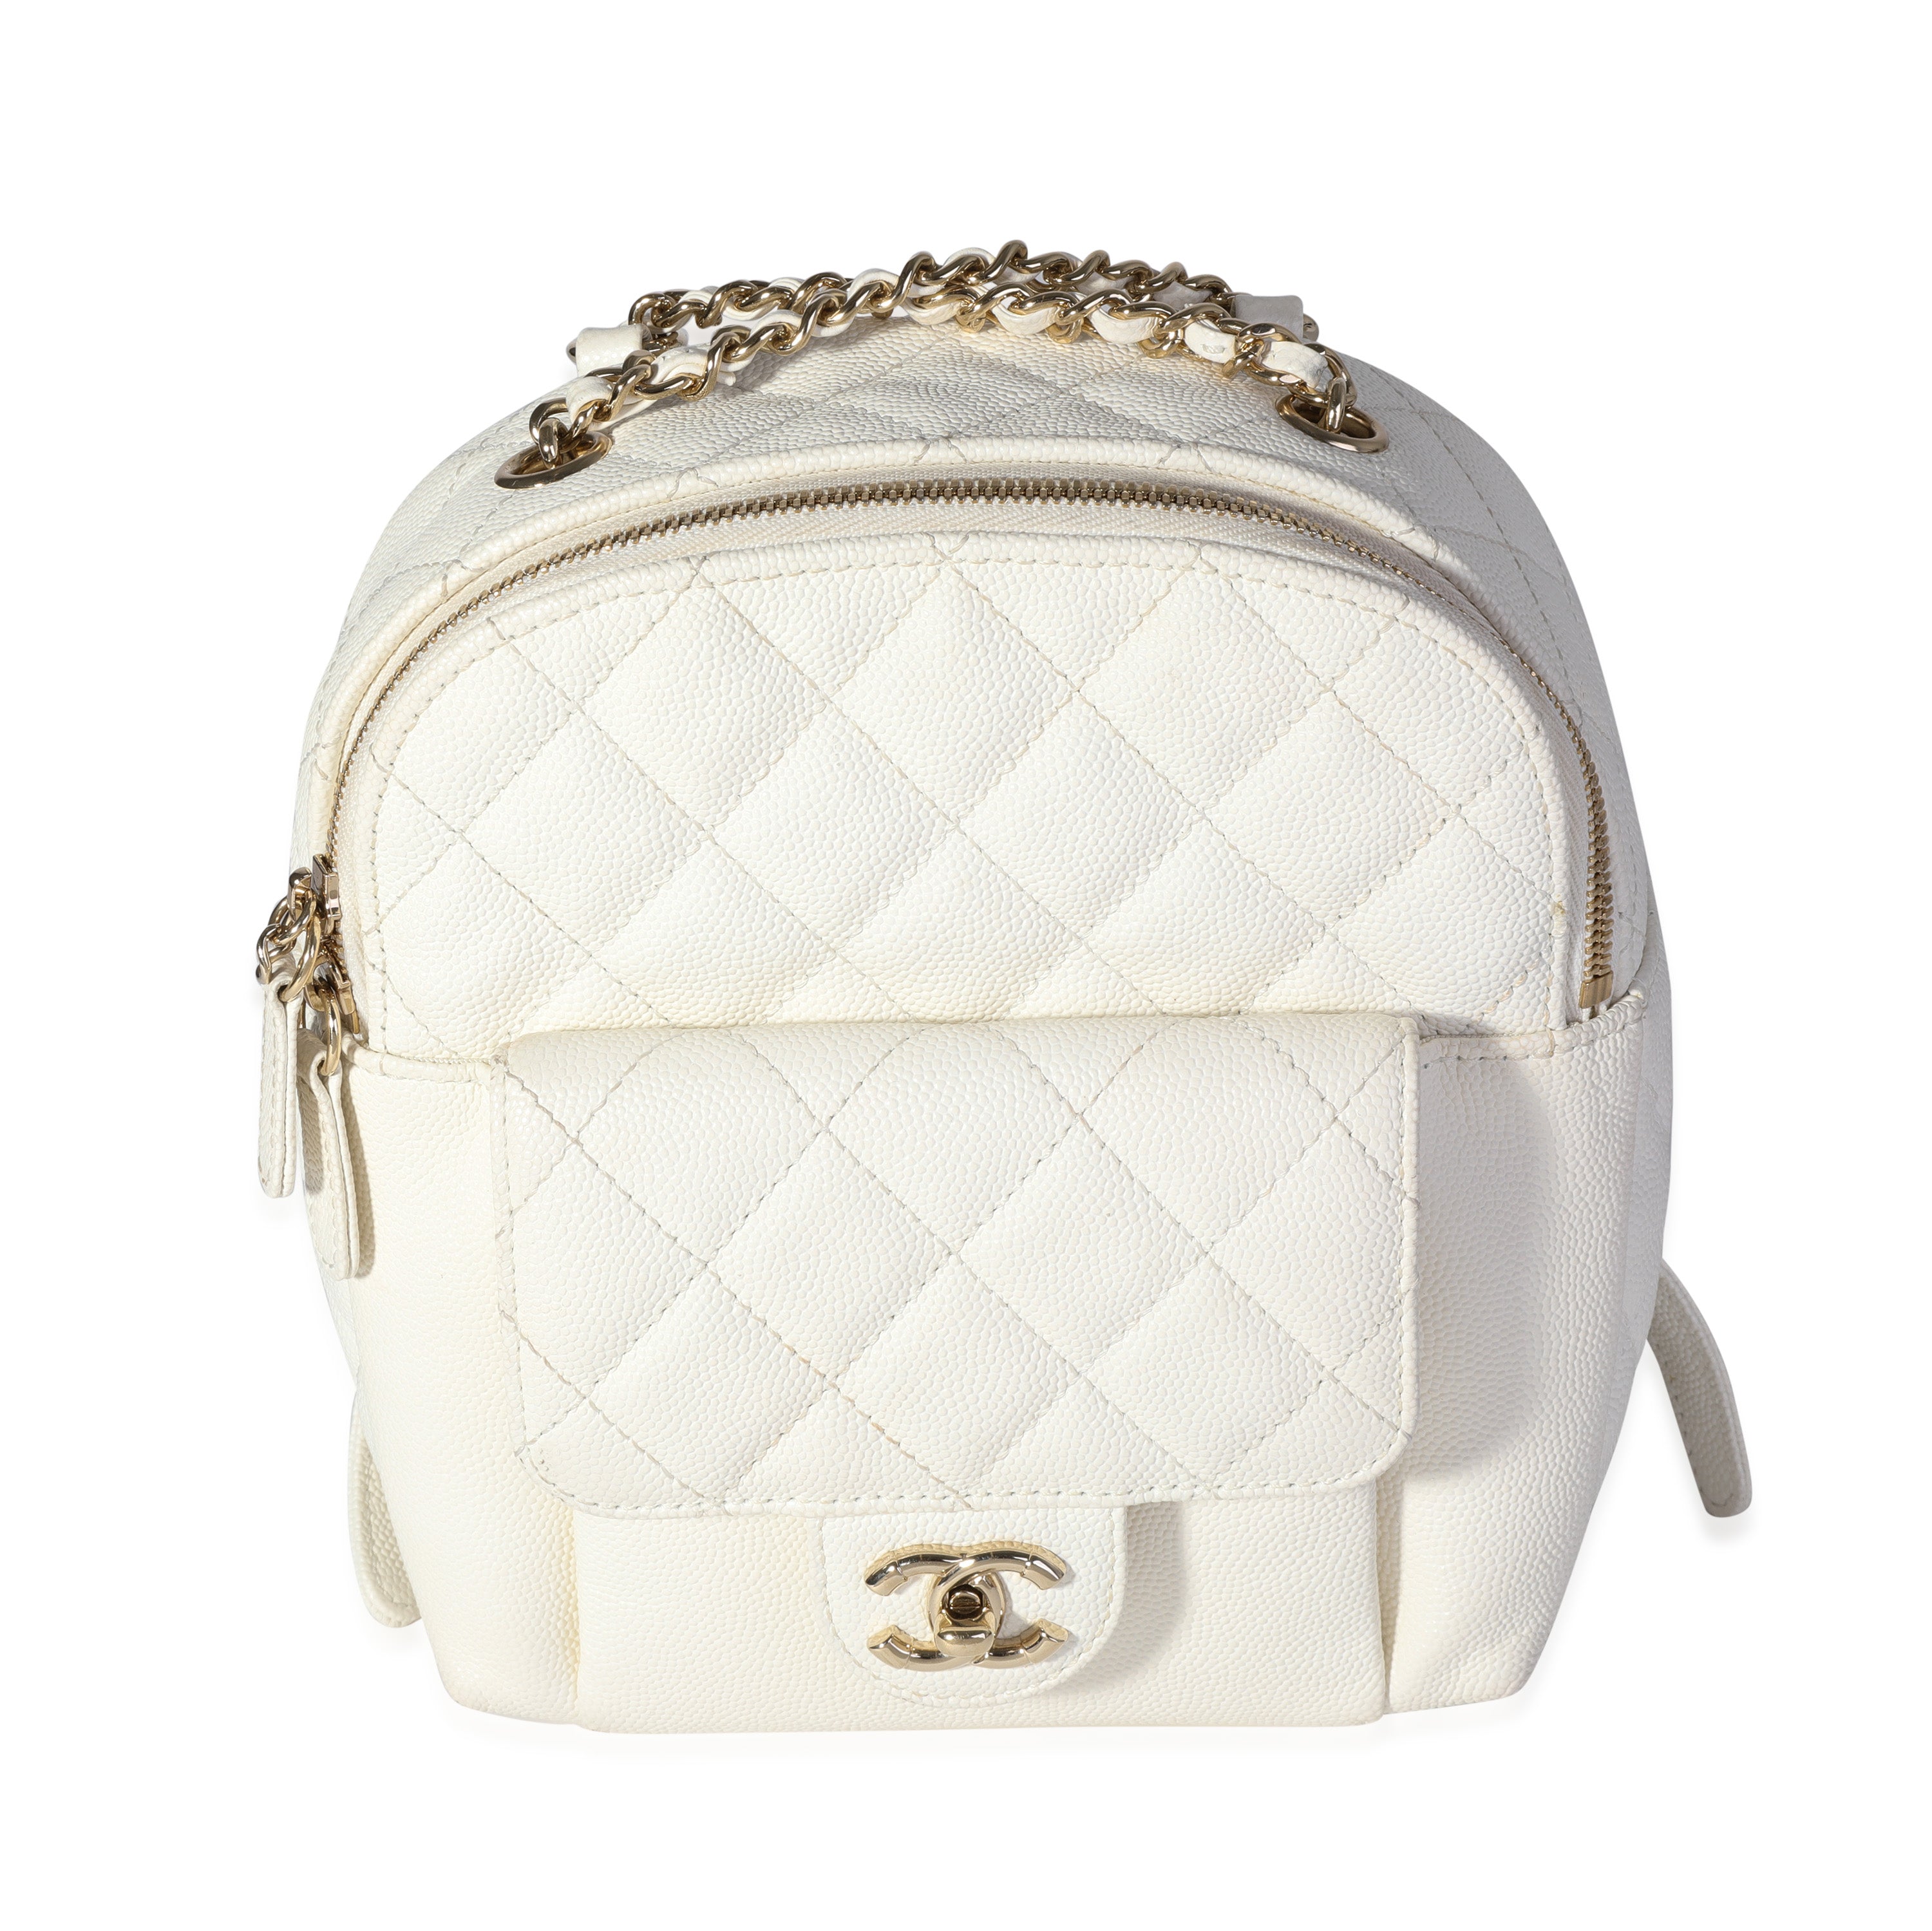 Bonhams : CHANEL COLOURFUL NYLON PATTERN BACKPACK IN SILVER TONED